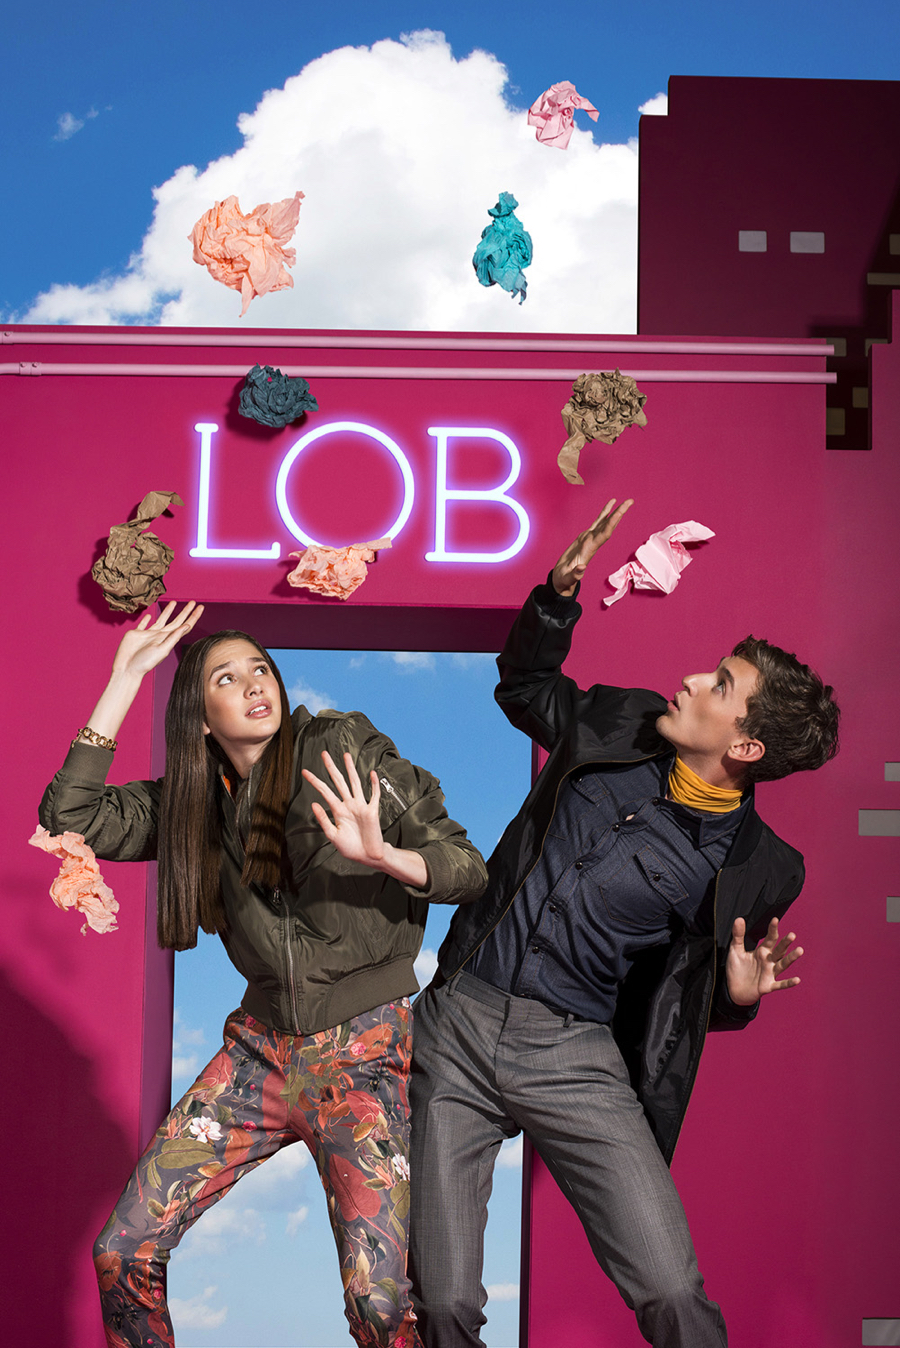 LOB Fall/Winter 2015 Campaign Embraces Fun with 'Everyday Heroes'